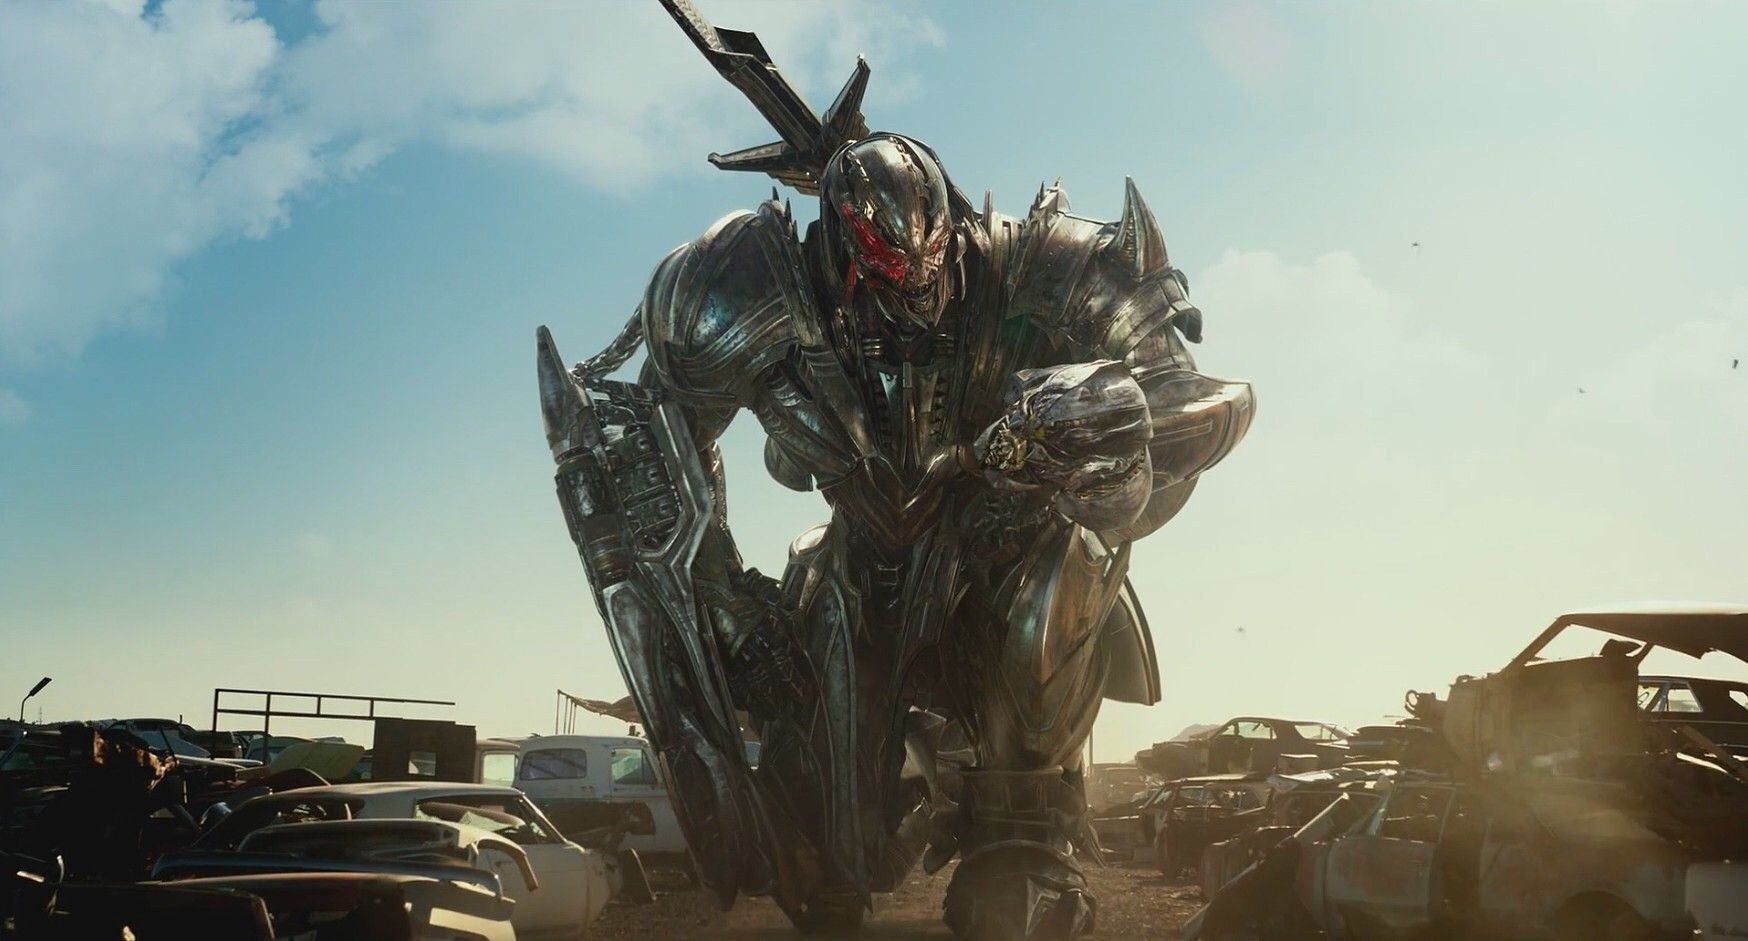 Megatron for Transformers: The Last Knight, Christopher Lee Zammit